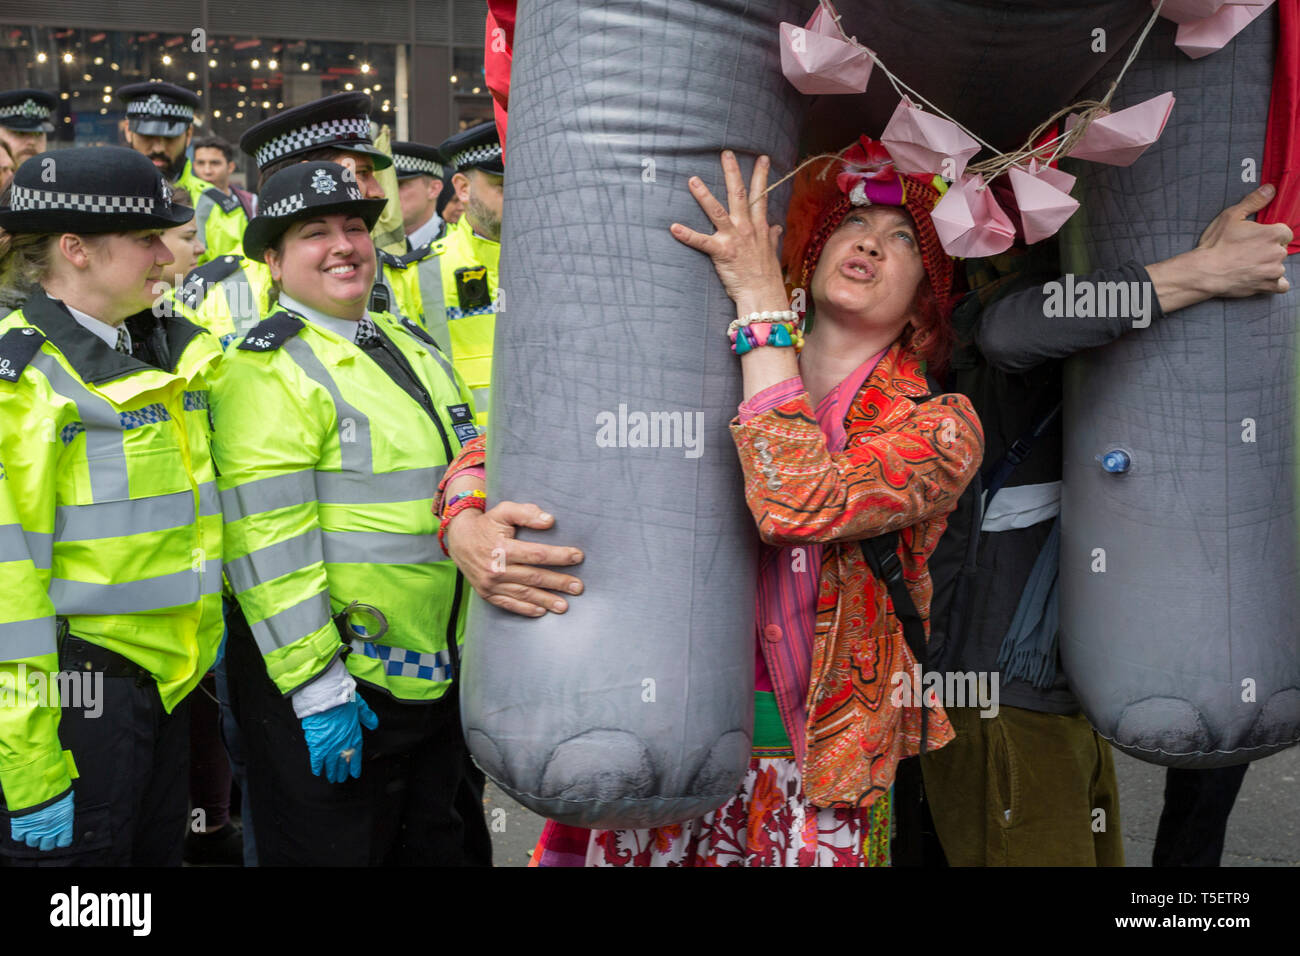 On the 10th consecutive day of protests around London by the climate change campaign Extinction Rebellion, a large inflatable elephant allows humour among protesters and police officers, on 24th April 2019, at Marble Arch, London England. Stock Photo